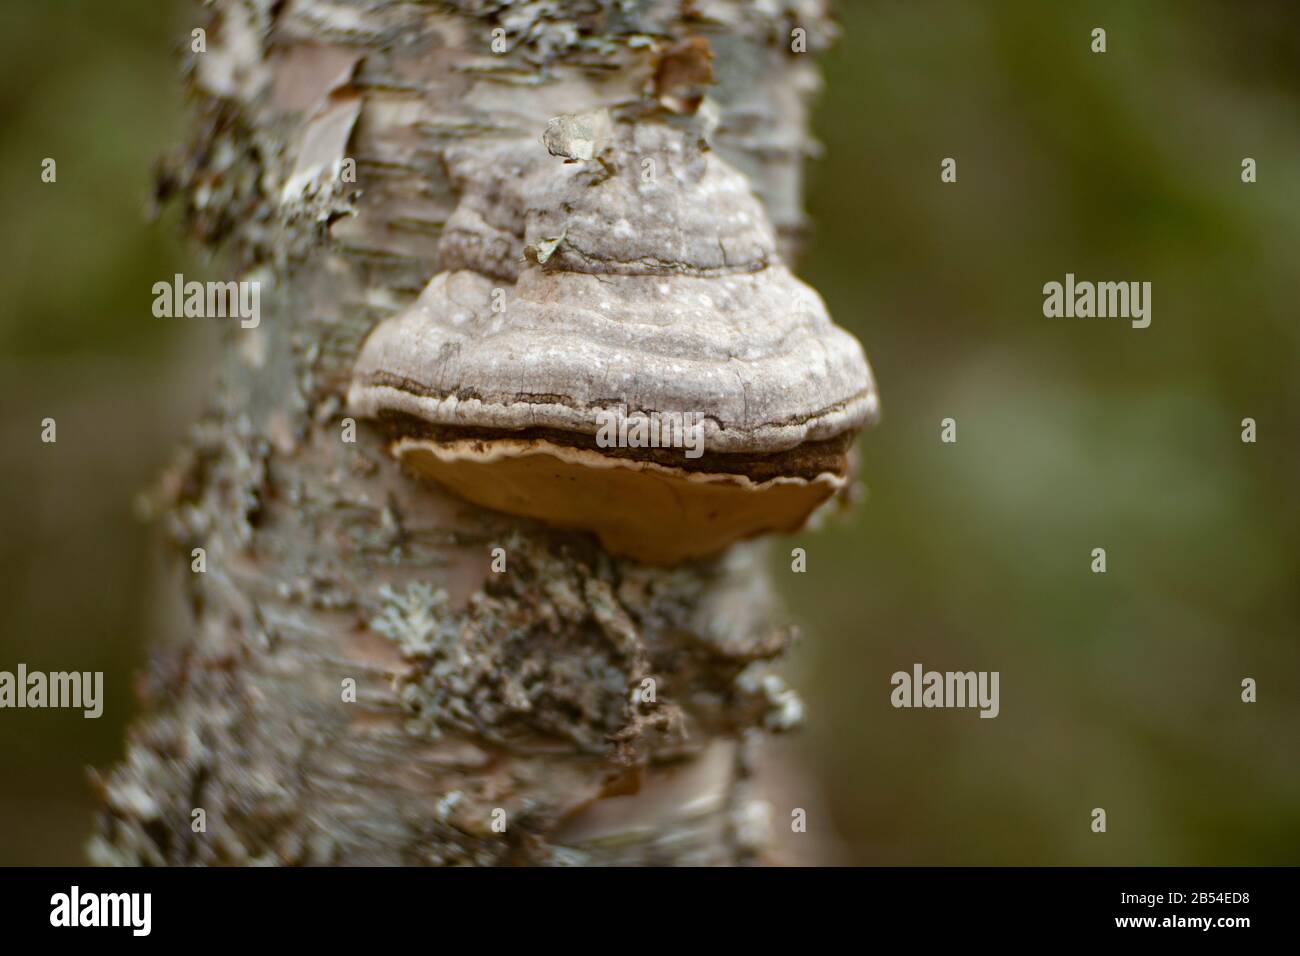 A Tinder Conk mushroom, Fomes fomentarius, growing on a dead red birch tree, Betula occidentalis, along the lower end of Callahan Creek, in Troy, Mont Stock Photo